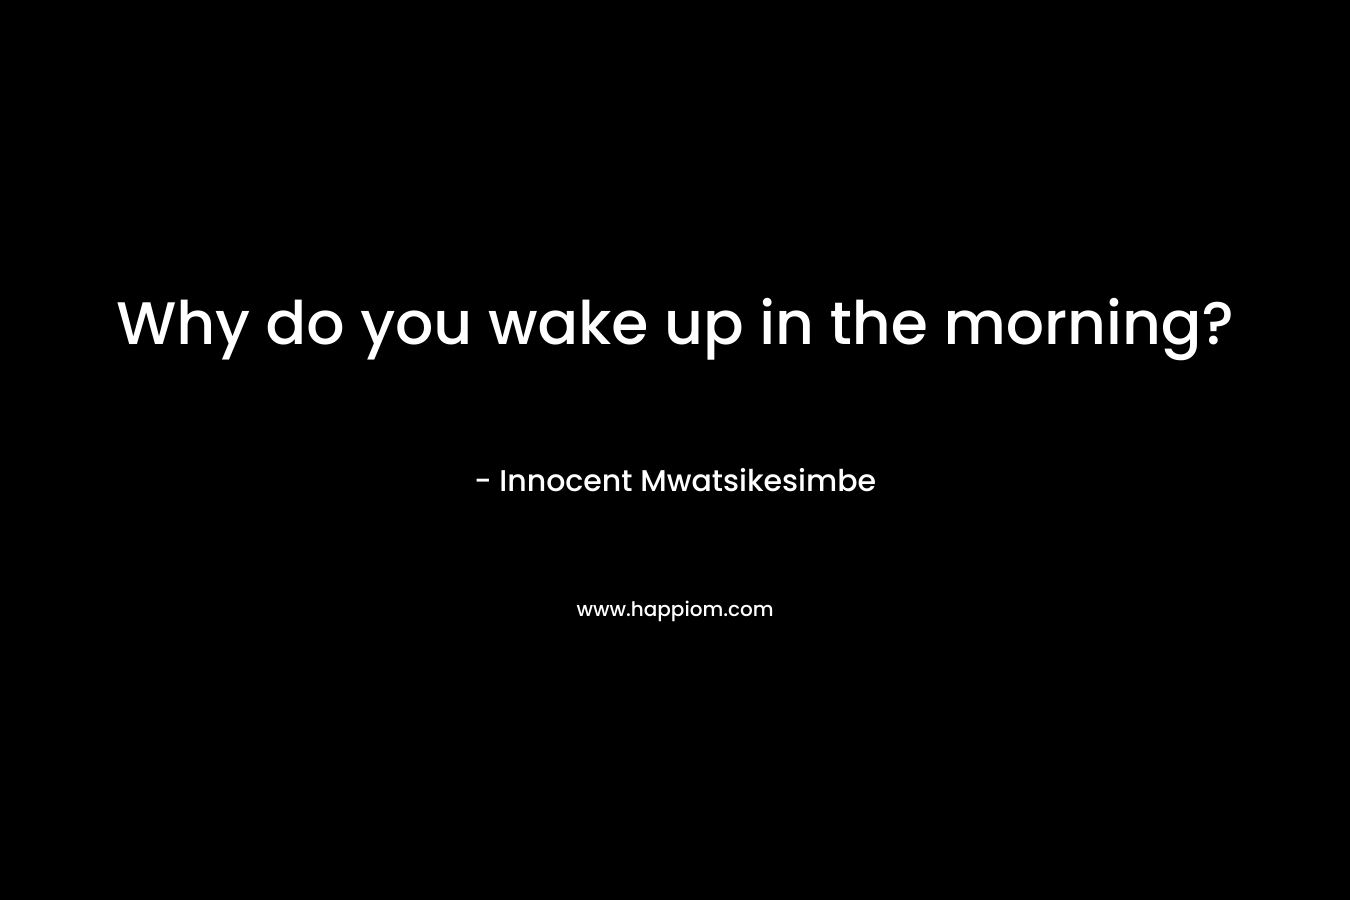 Why do you wake up in the morning?